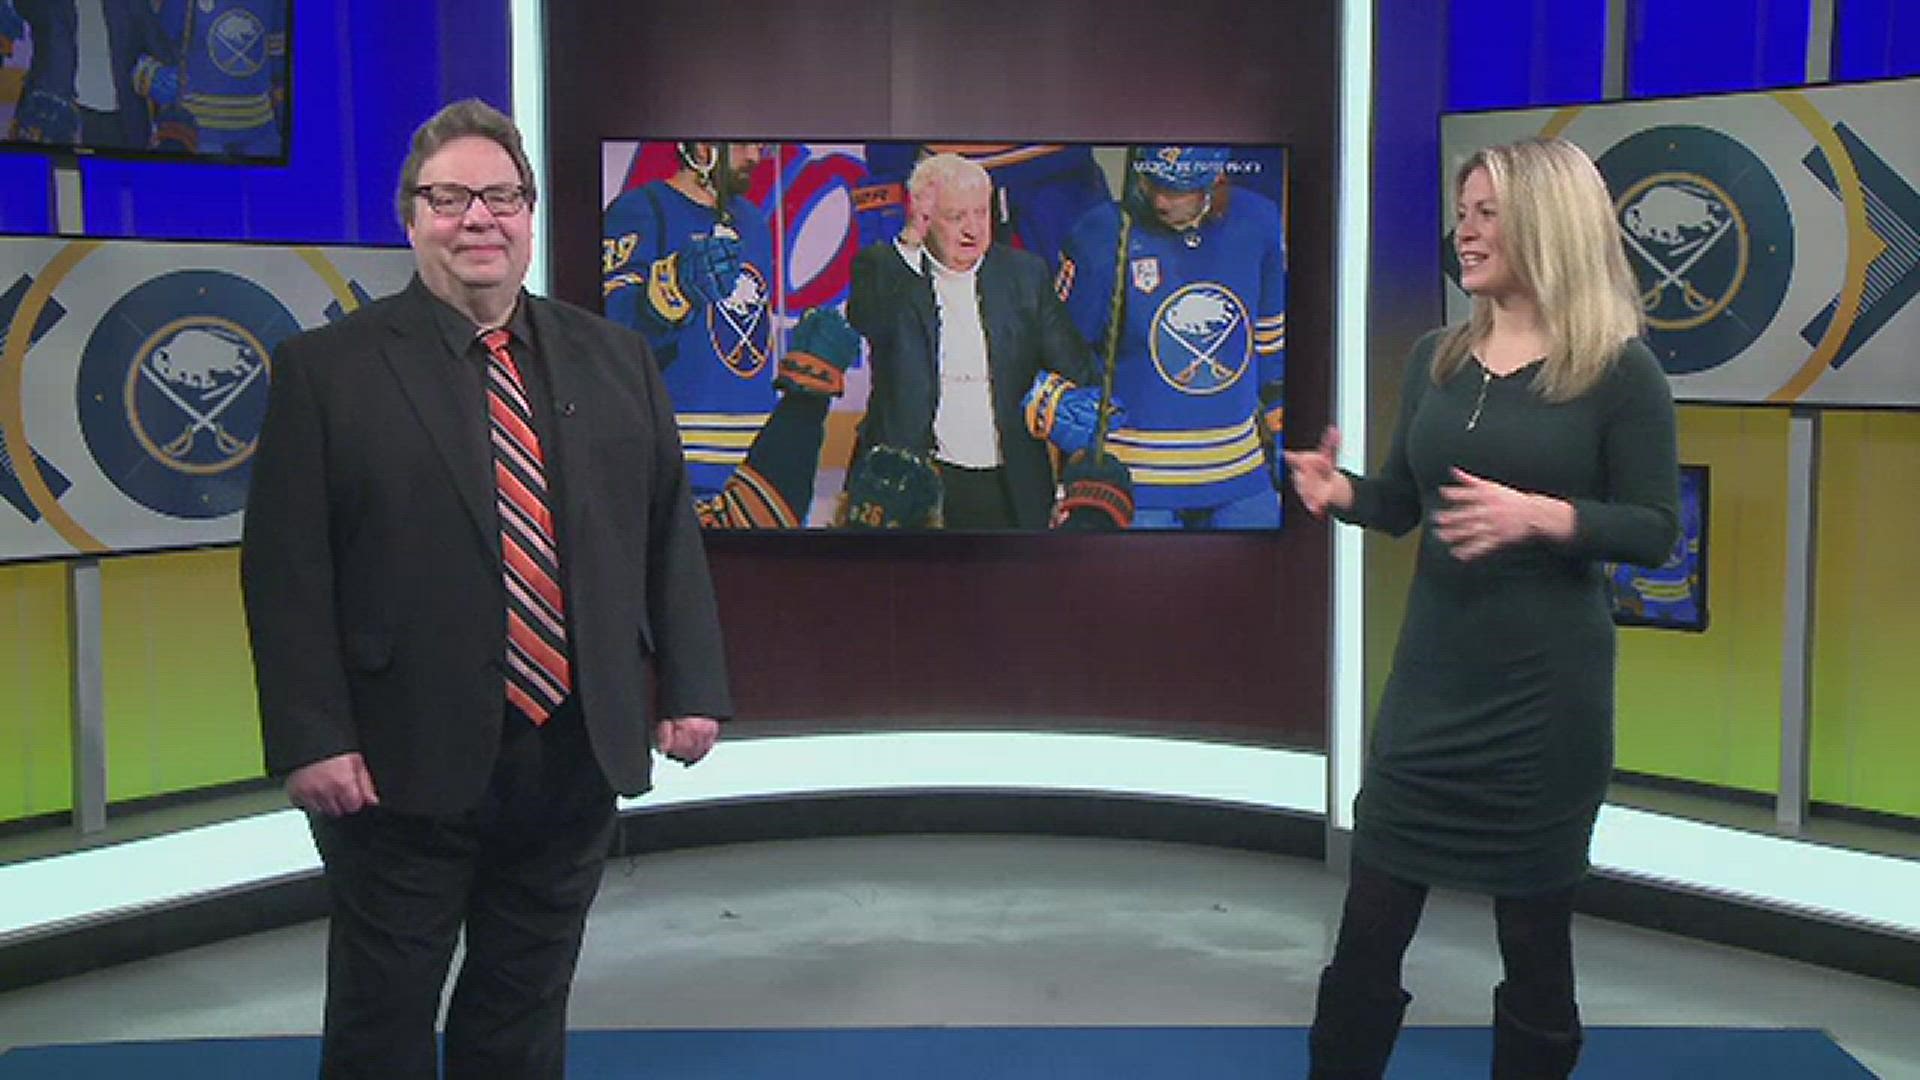 Paul Hamilton and Julianne Pelusi discuss the Sabres' recent success, and how the team honored Rick Jeanneret in the perfect way.